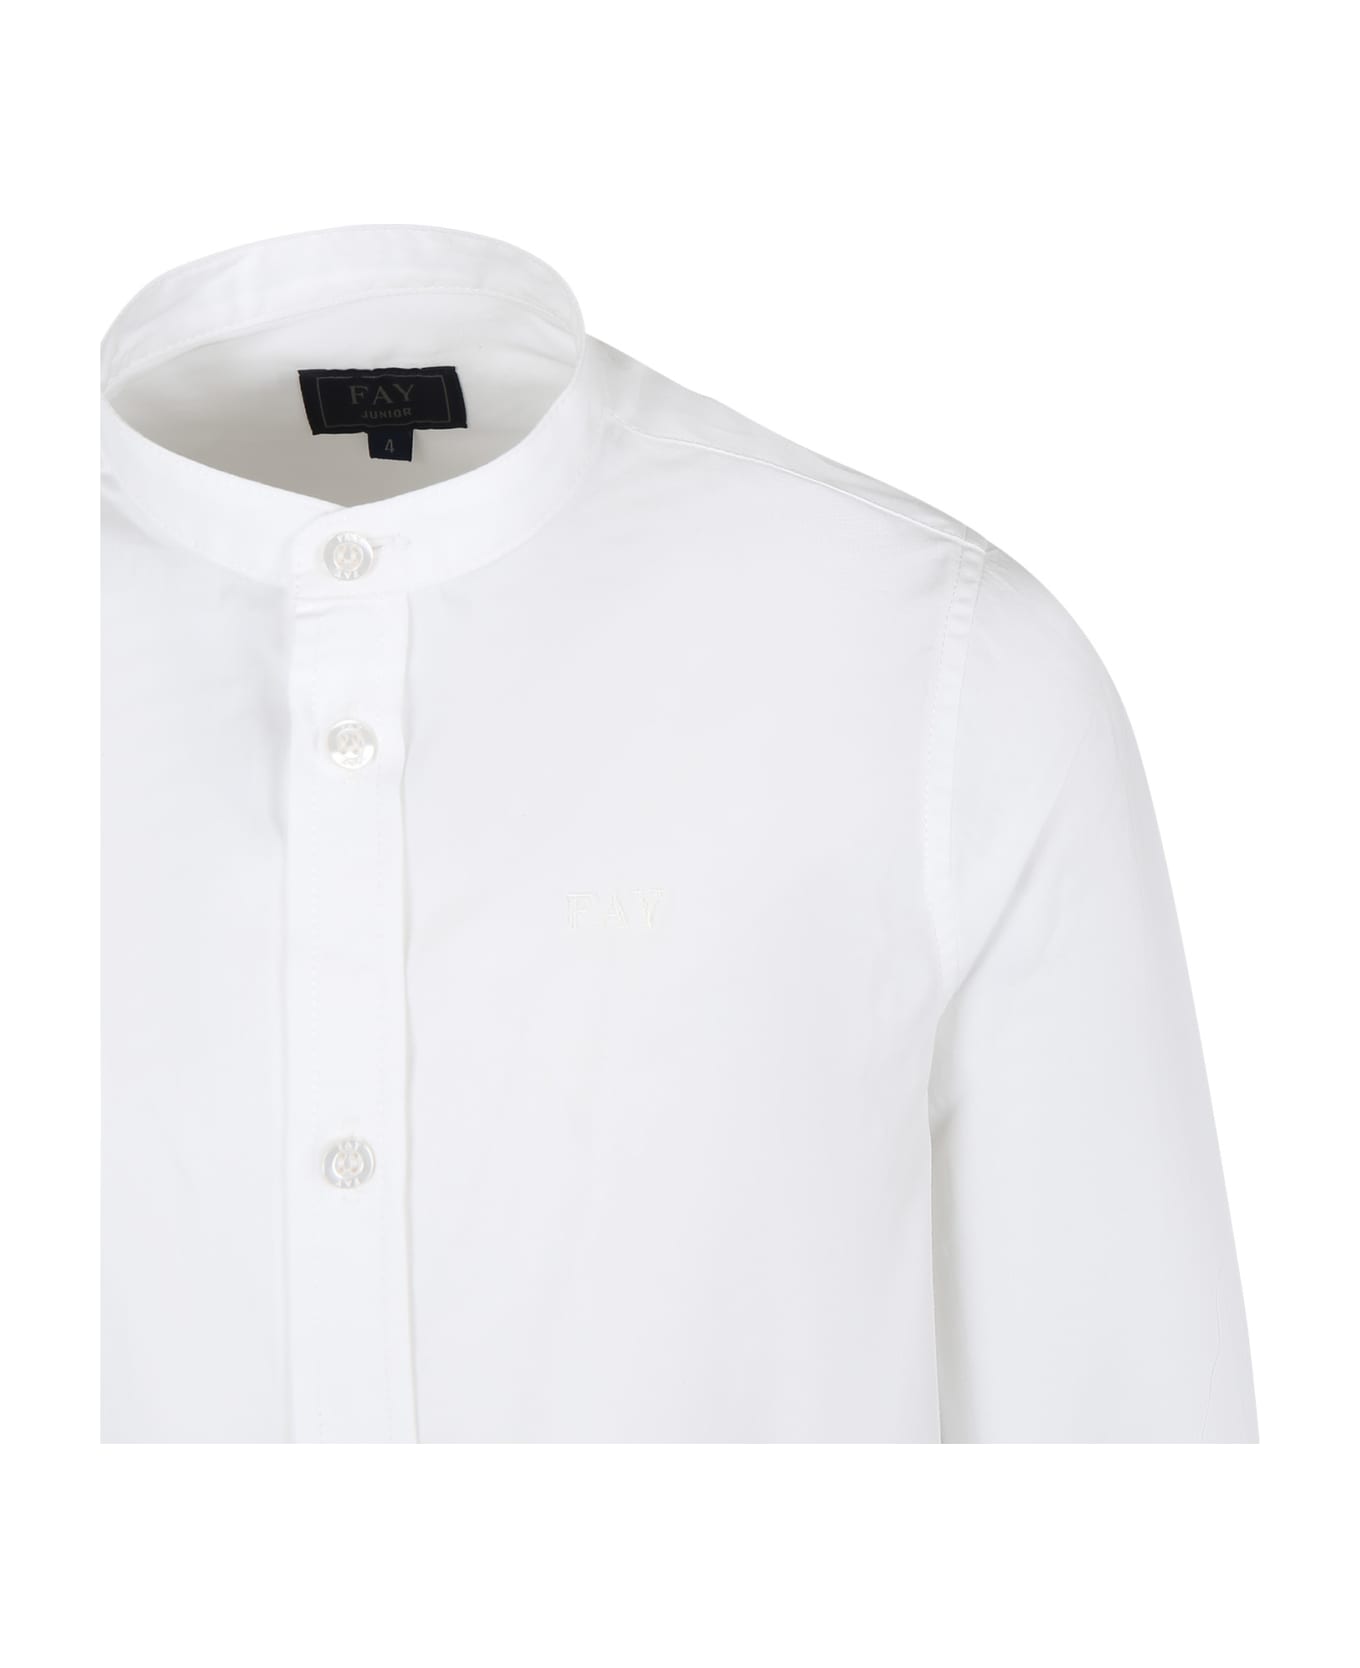 Fay White Shirt For Boy With Logo - White シャツ